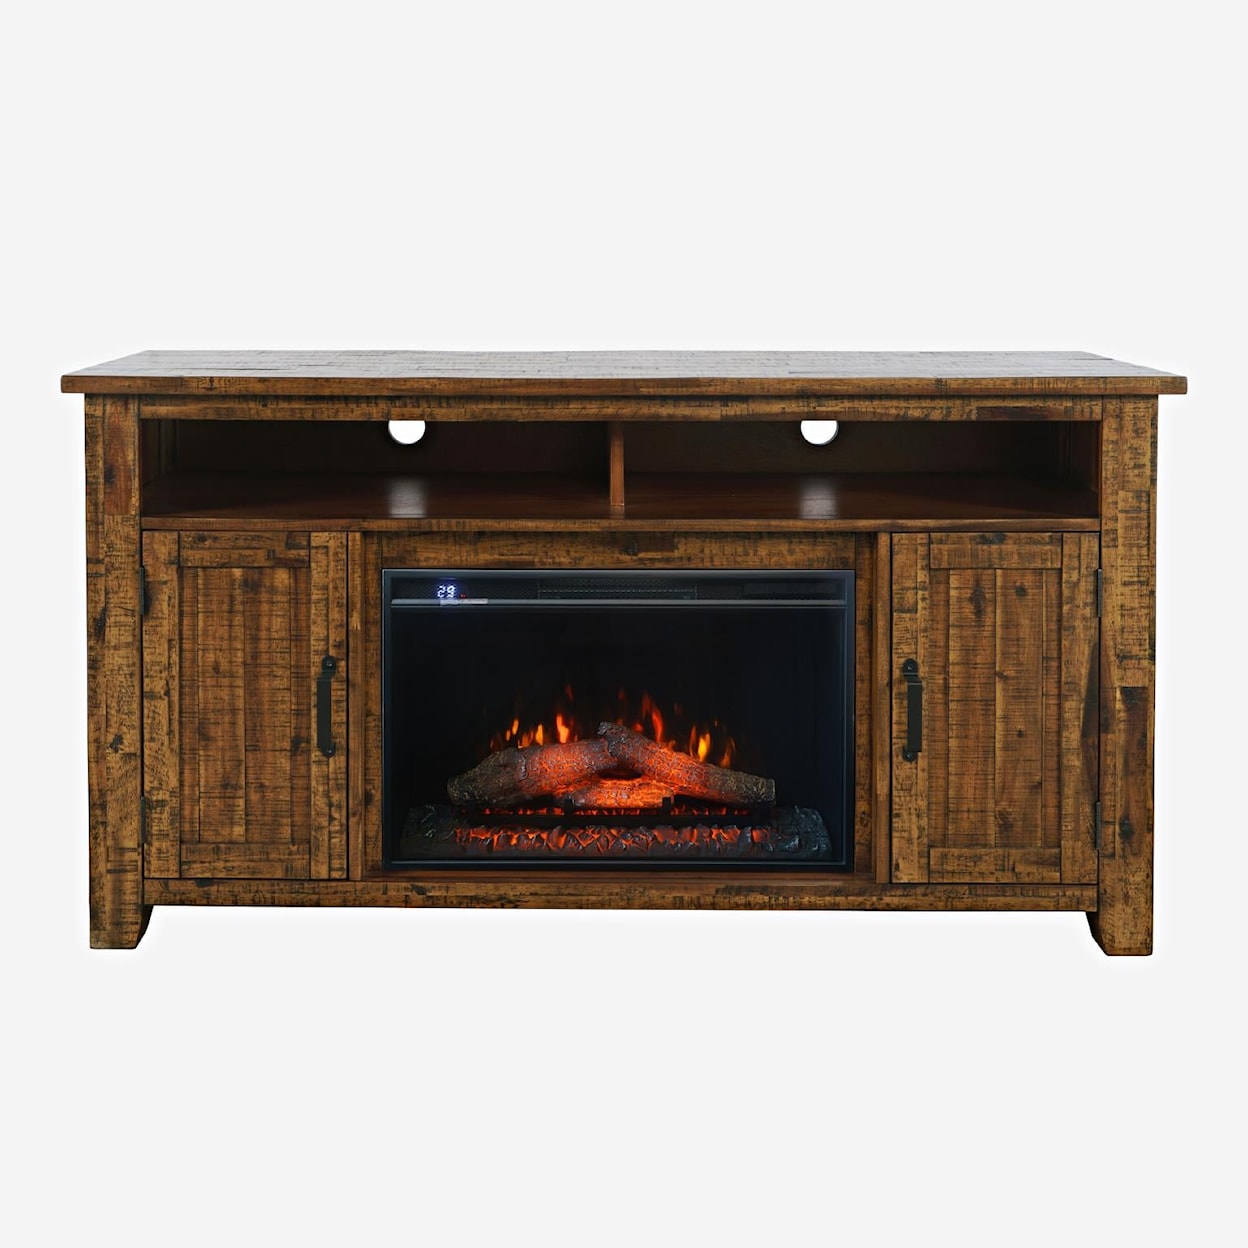 Jofran Cannon Valley Fireplace with Logset